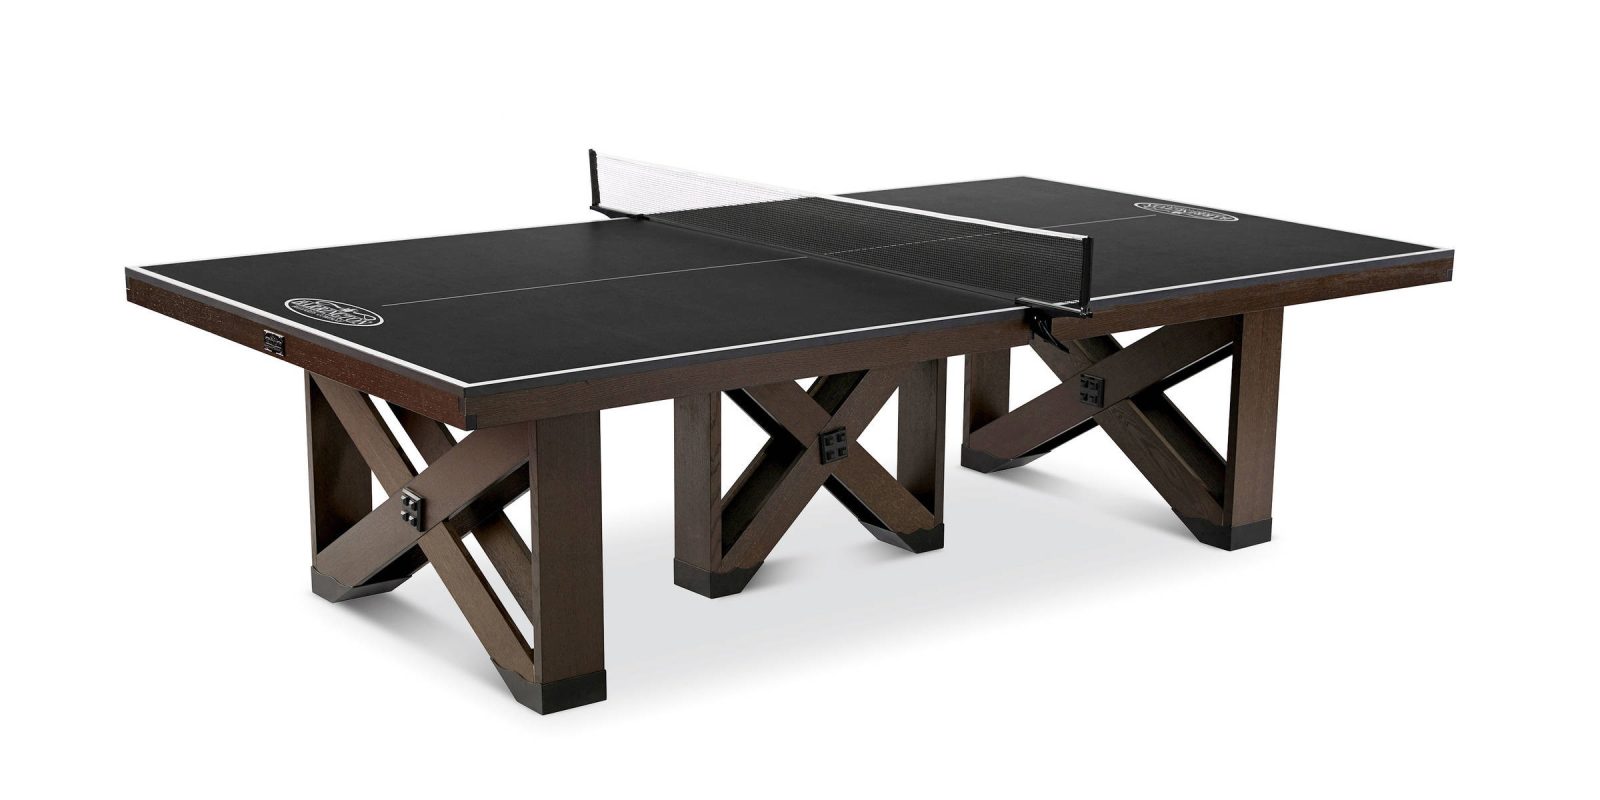 Barrington S Wood Table Tennis Set Is Now Up To 180 Off At